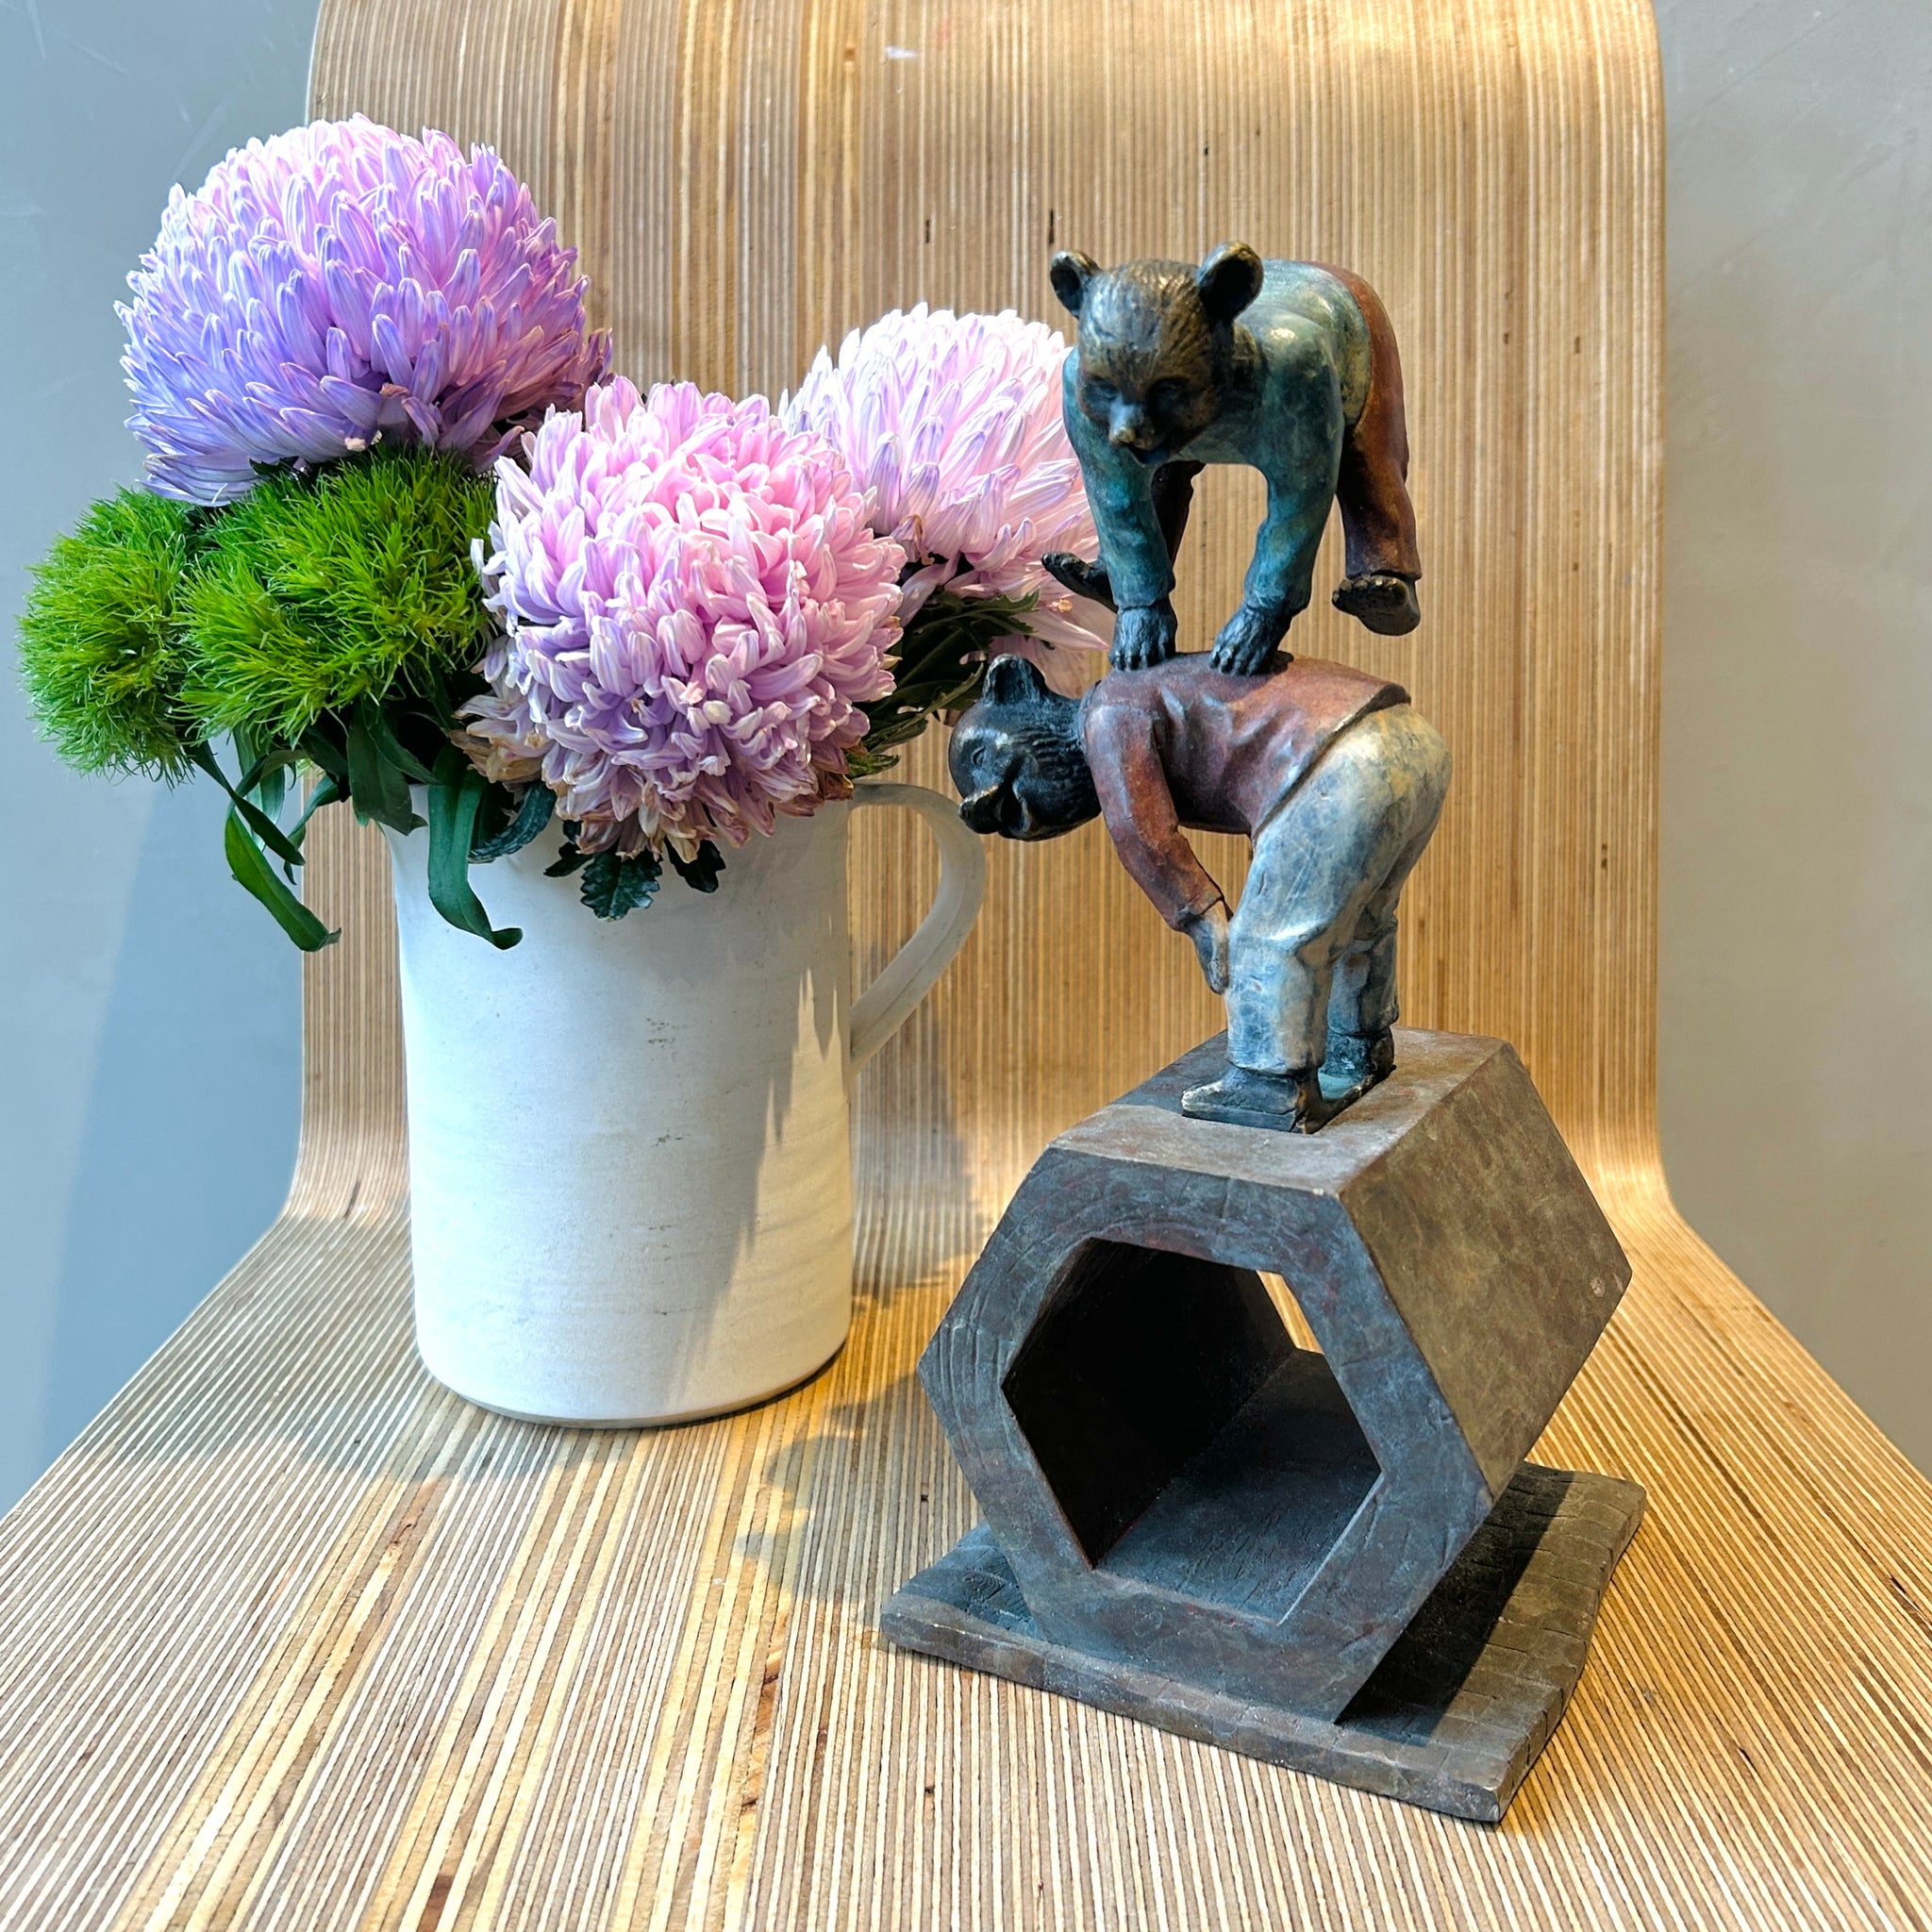 'Leap Bears' David Bromley. Cast Bronze Mini Maquette with base. Edition of 35. 27cm height.